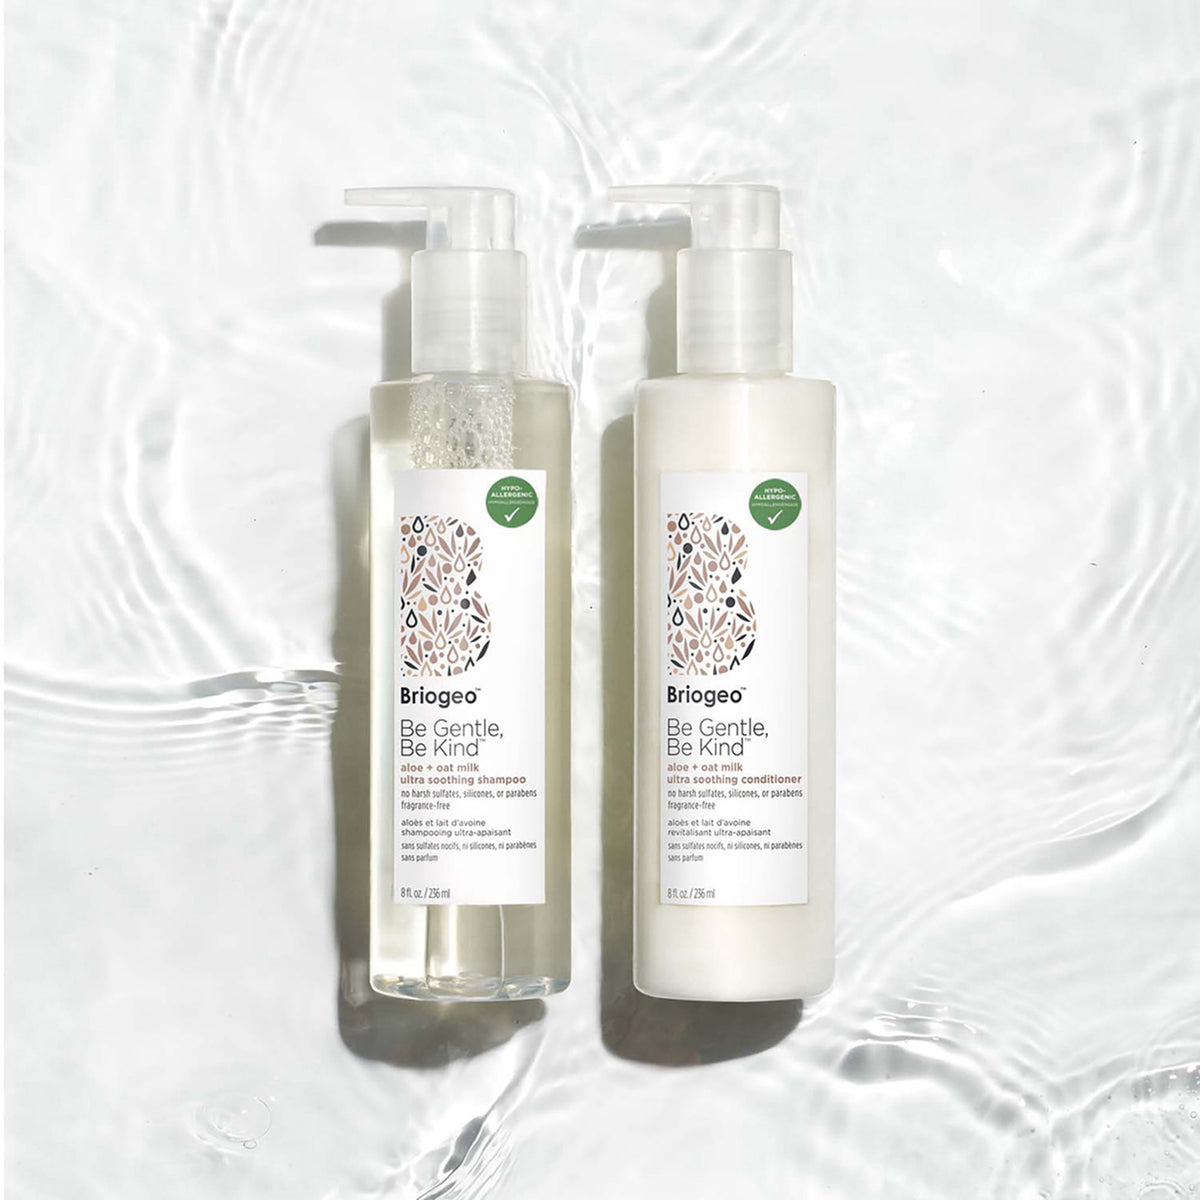 Briogeo Be Gentle, Be Kind Aloe and Oat Milk Ultra Soothing Conditioner .